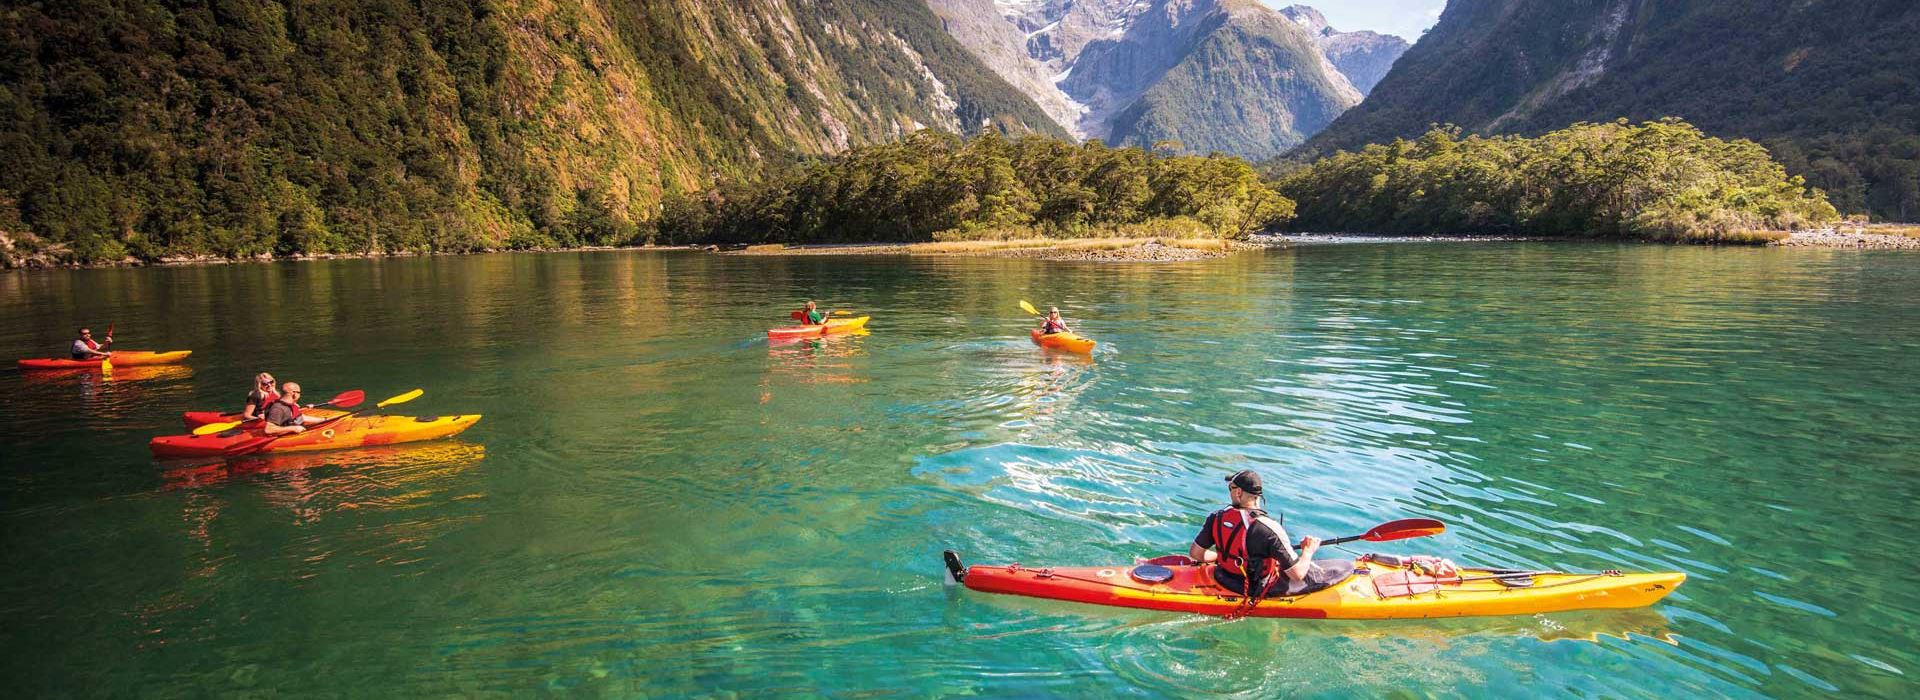 12-Day Ultimate Family Adventure in the South Island